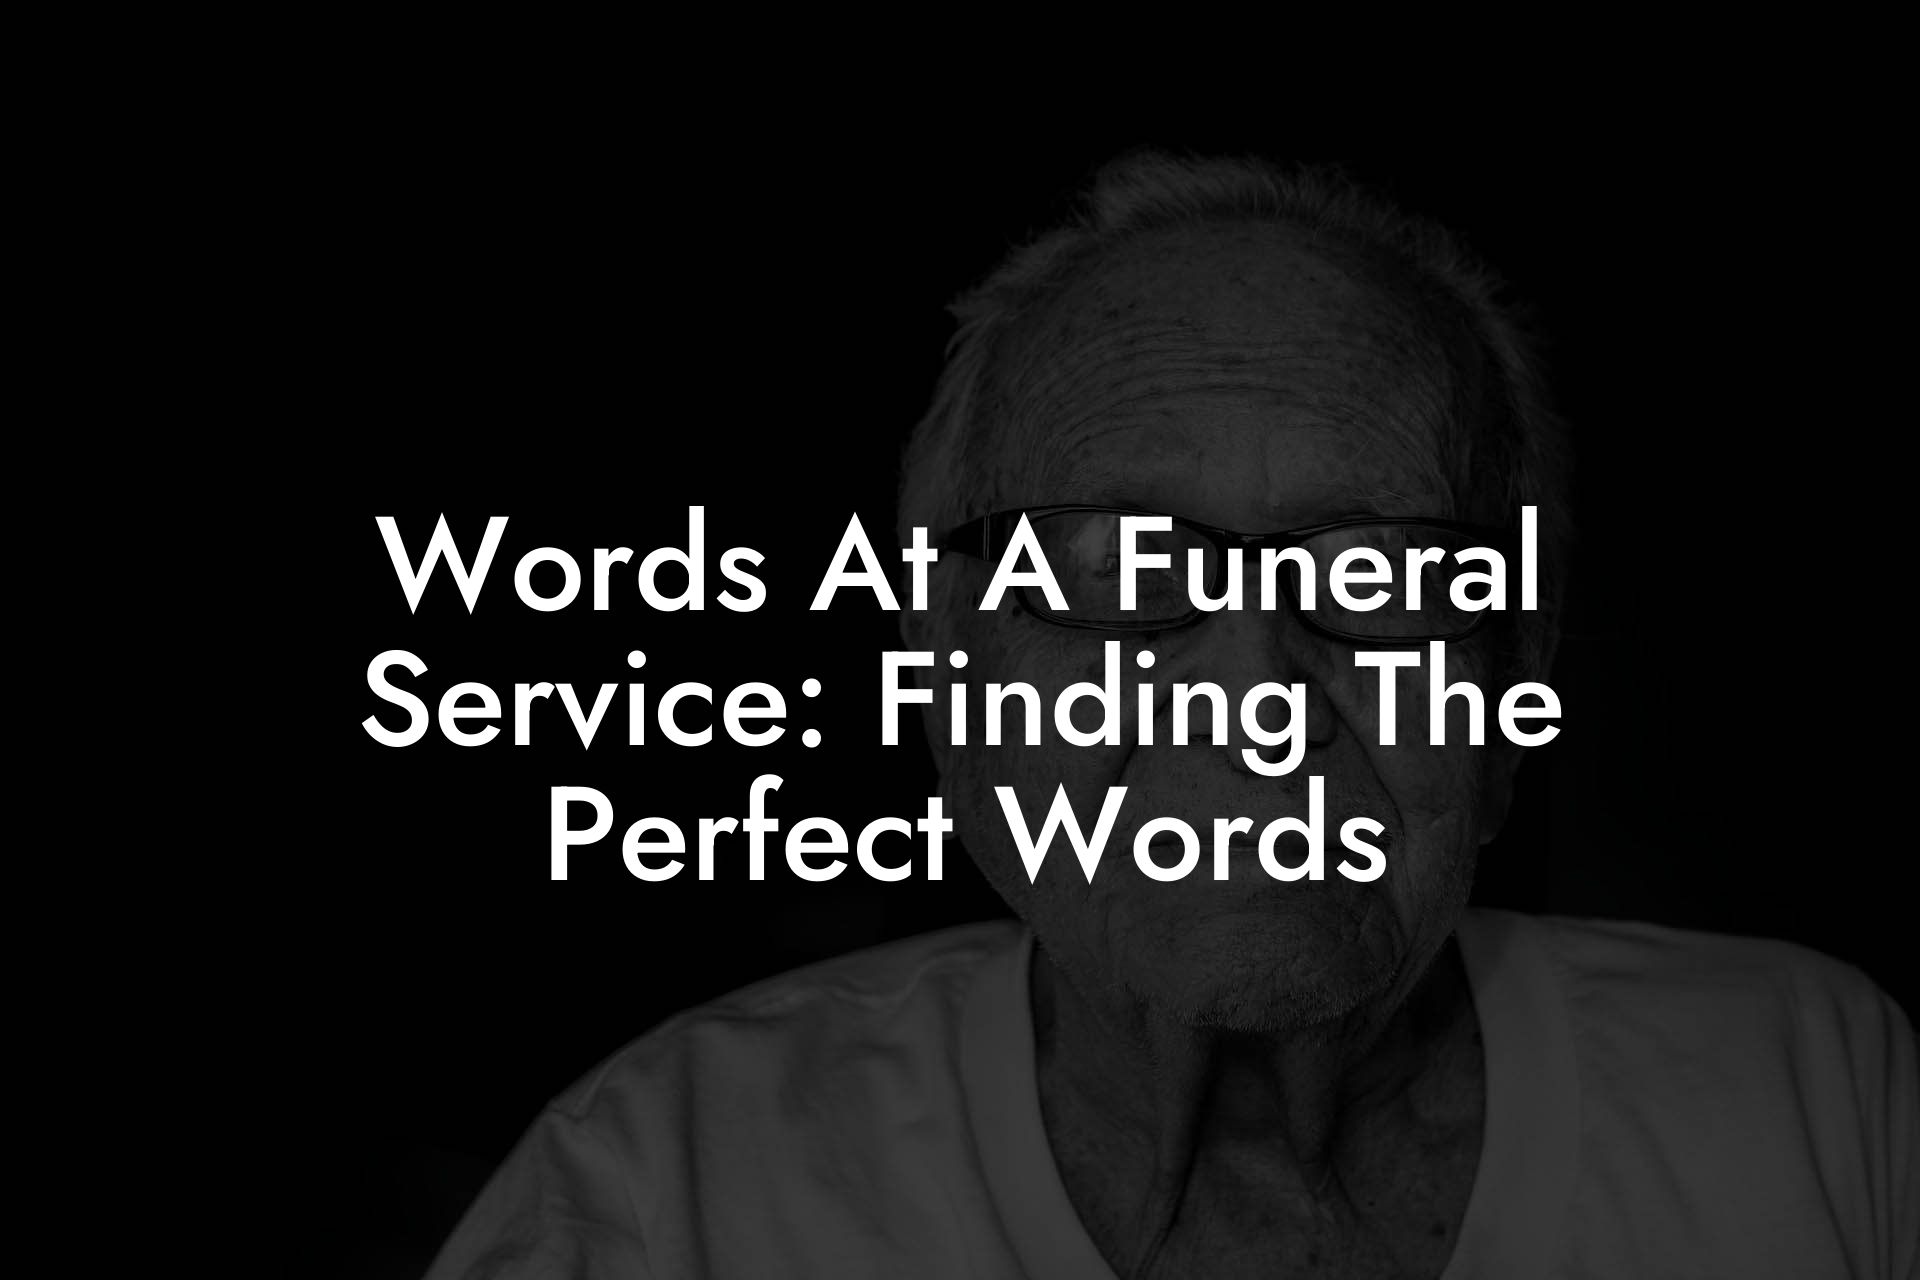 Words At A Funeral Service: Finding The Perfect Words